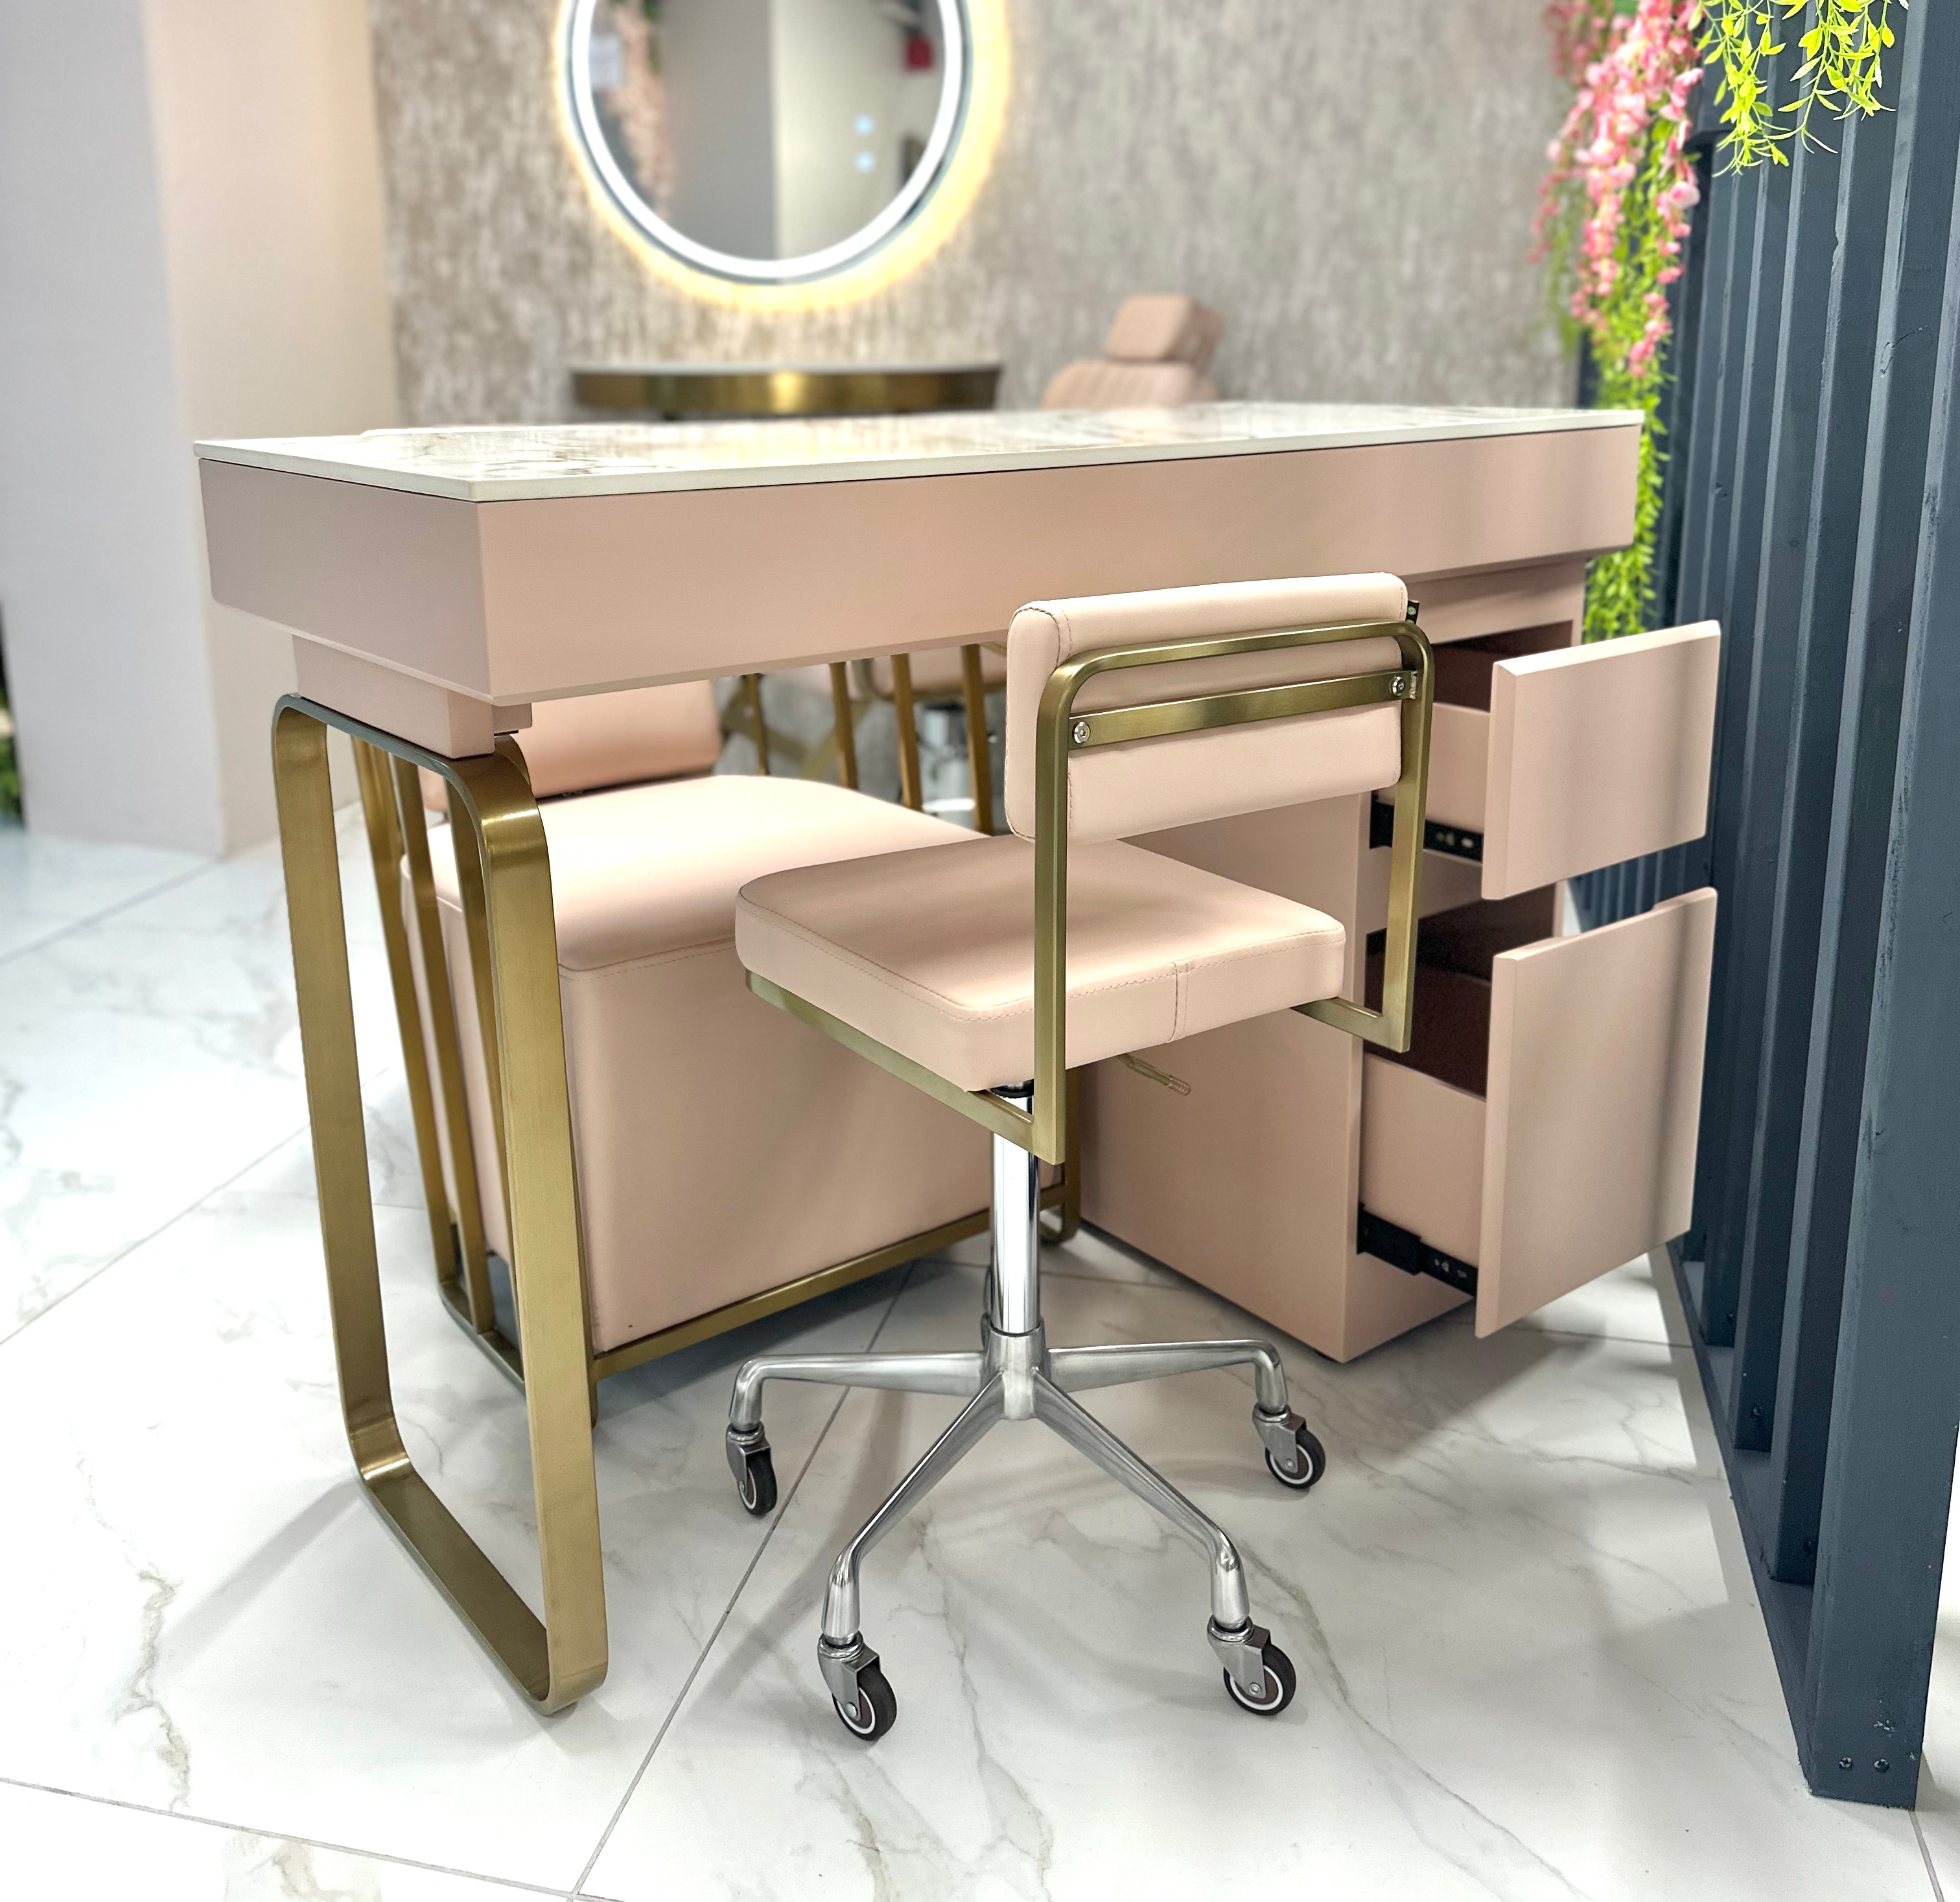 The Maia Nail Desk with White Gold Stone Top - Pink & Gold by SEC